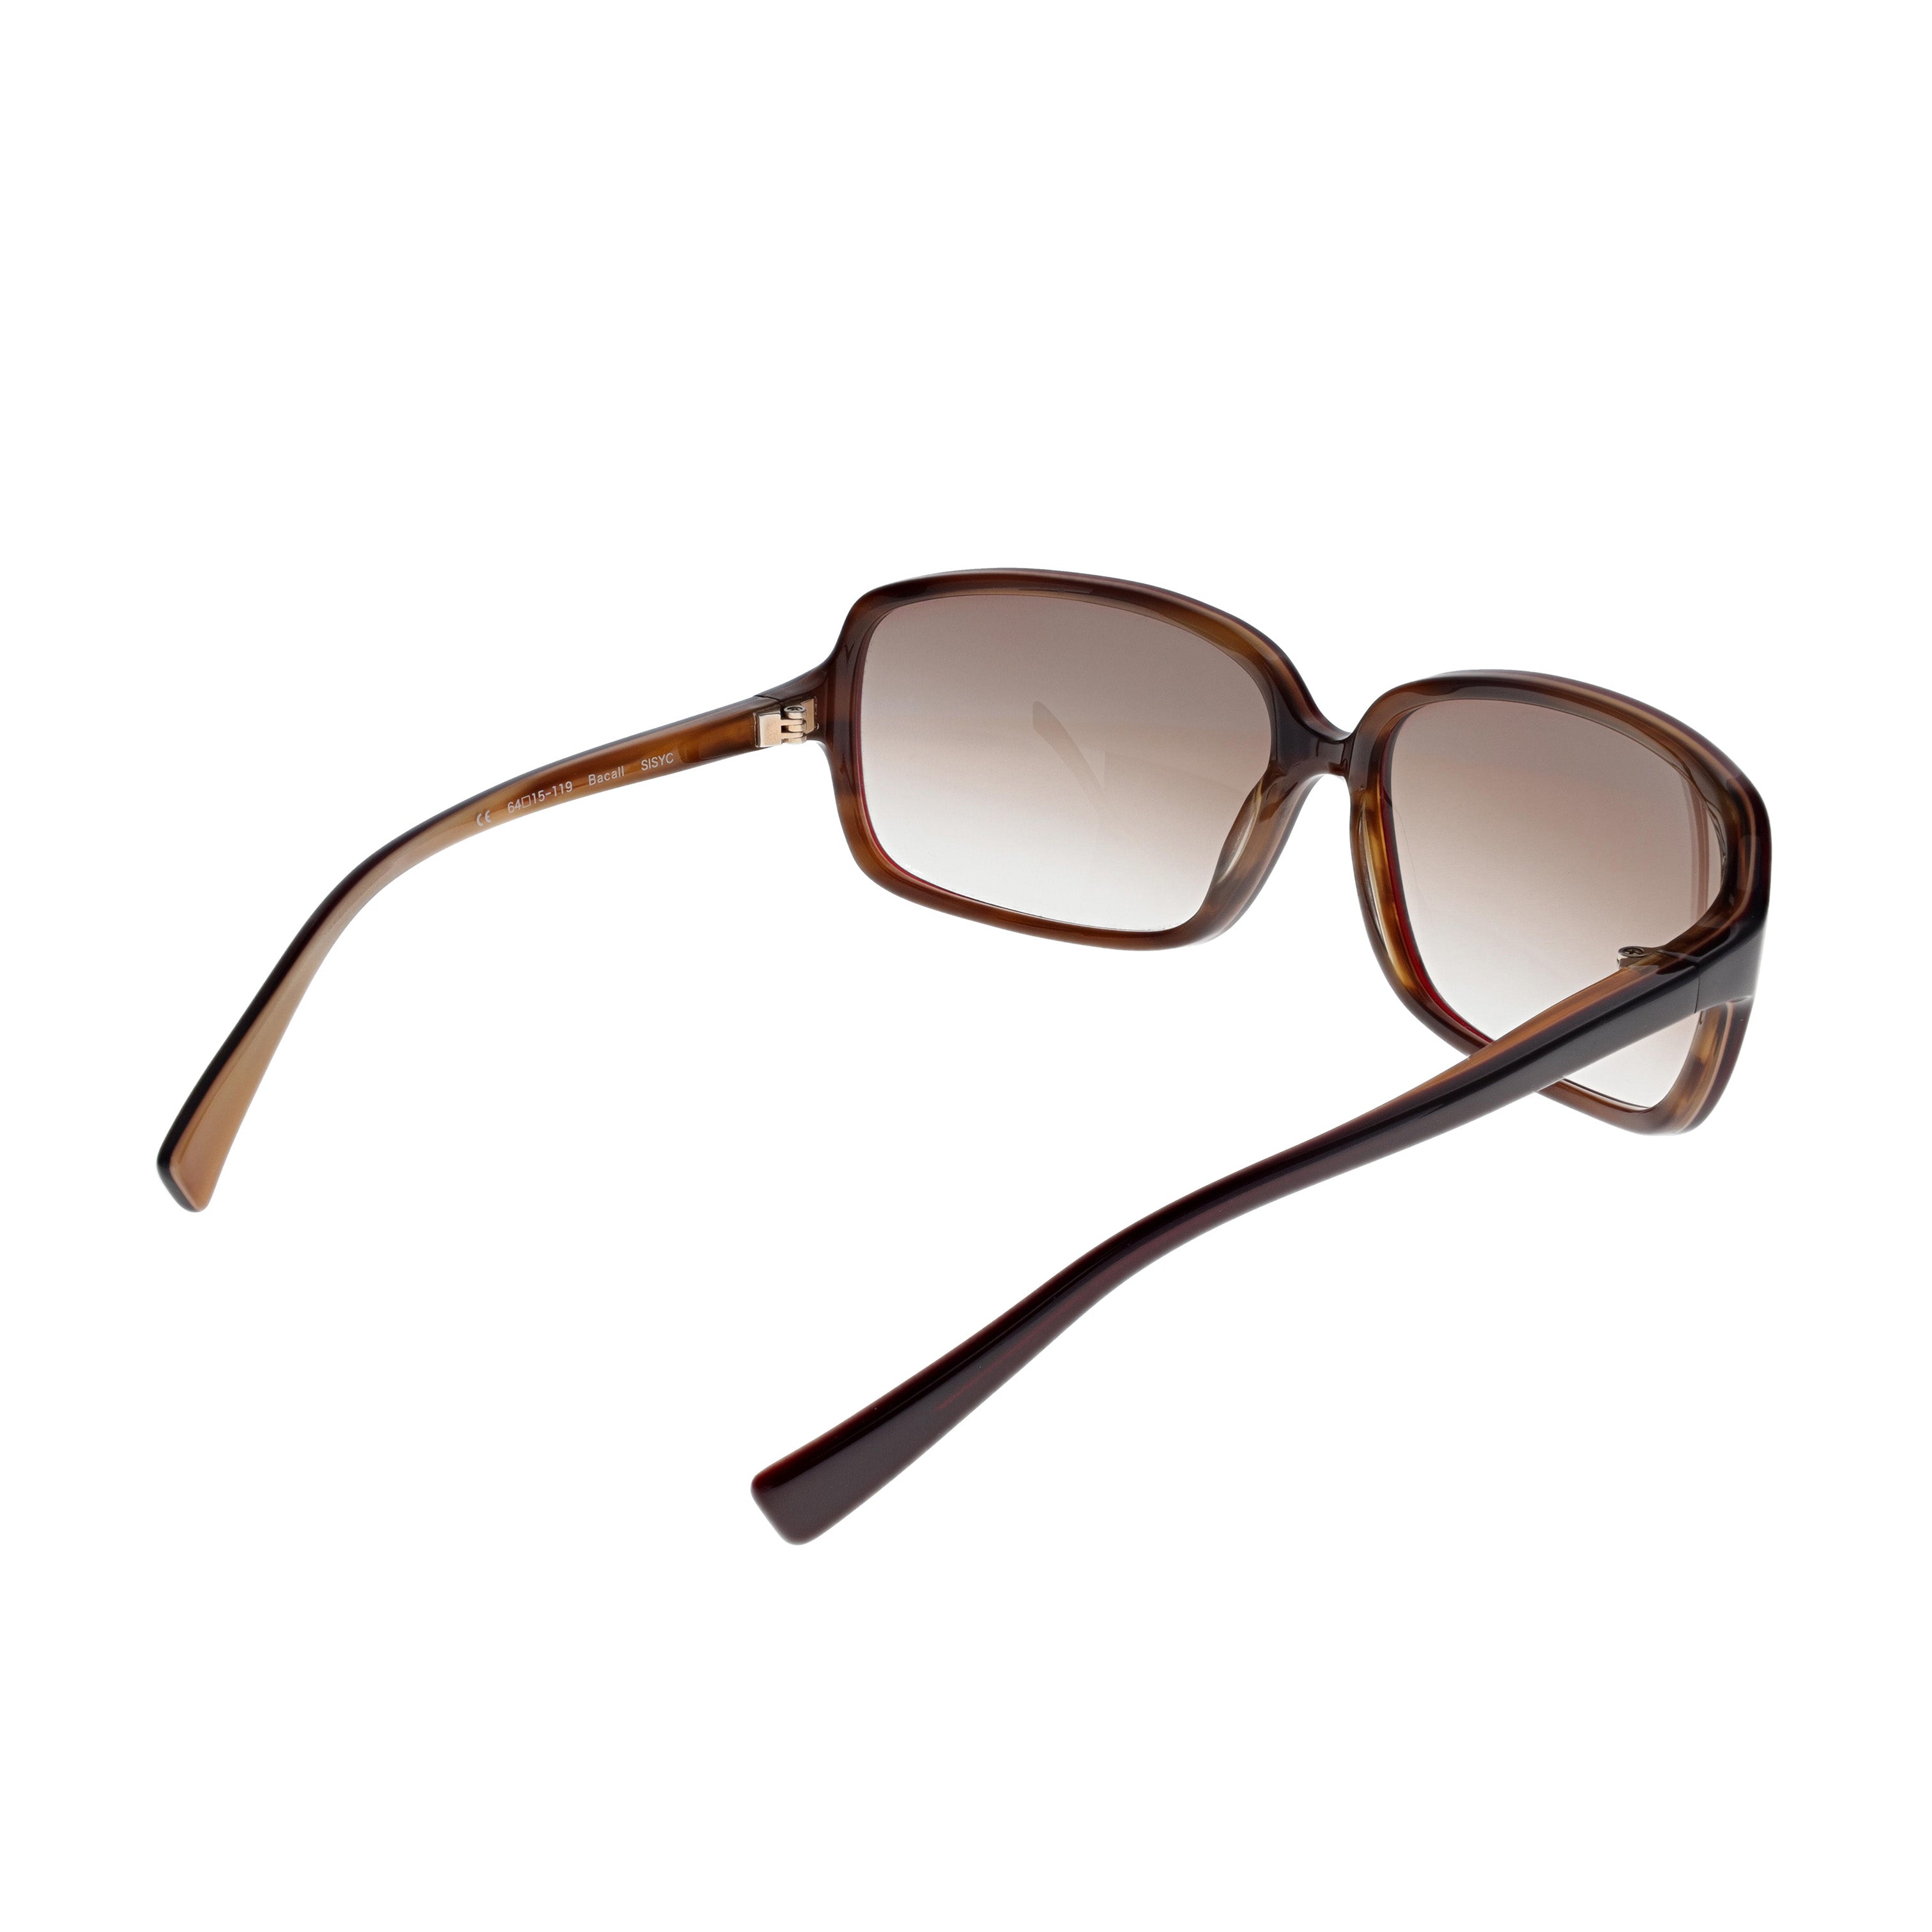 Oliver Peoples Bacall Sunglasses - SISYC